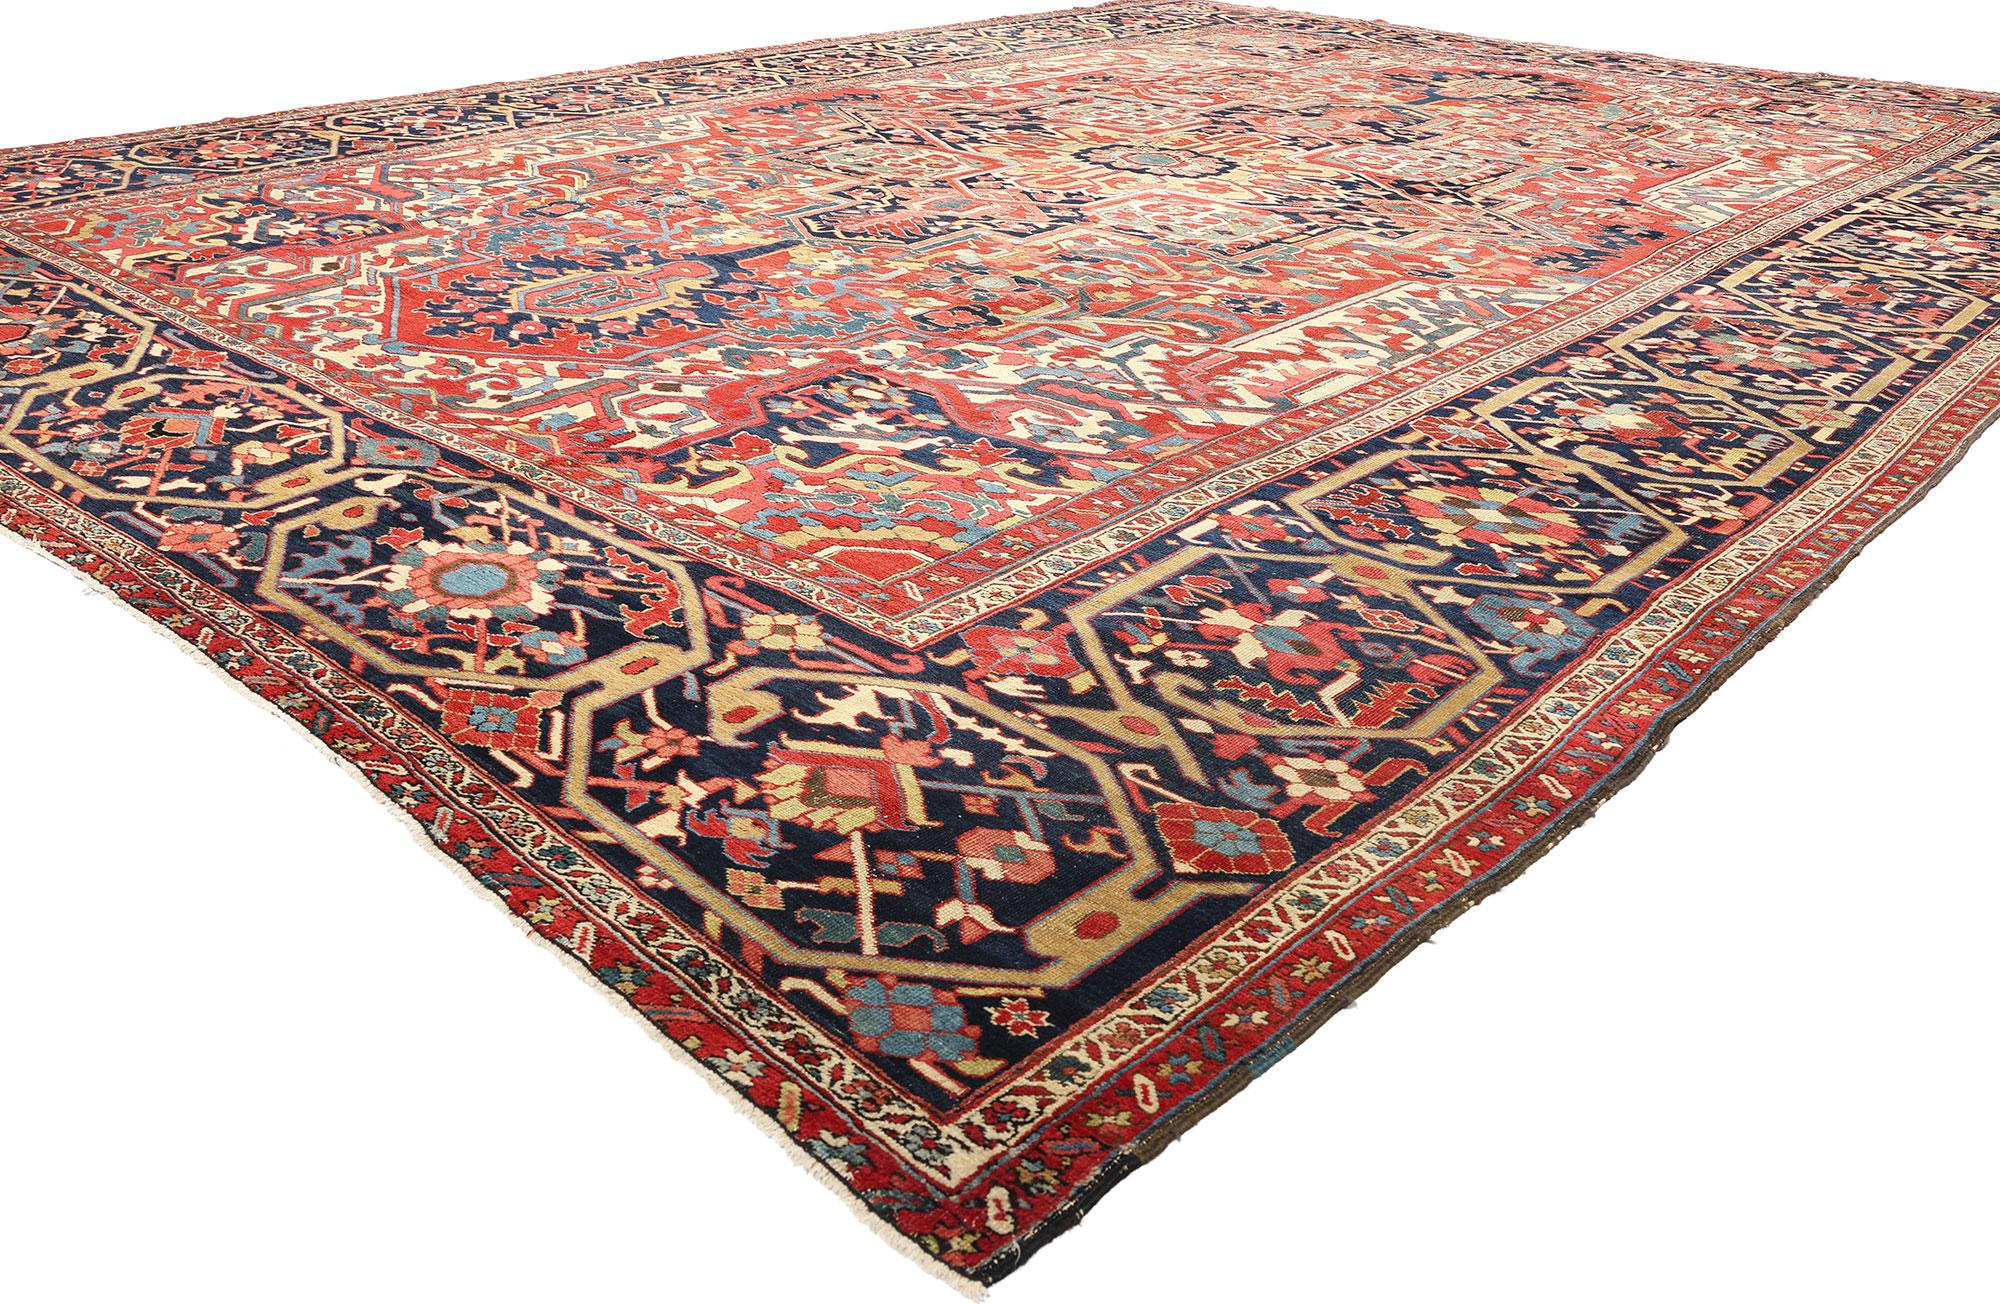 78765 Oversized Antique Persian Heriz Rug, 13'04 x 18'05. Oversized antique Persian Heriz rugs are a specific category of Heriz rugs crafted in larger-than-average dimensions, offering expansive coverage for grand interior spaces. Originating from